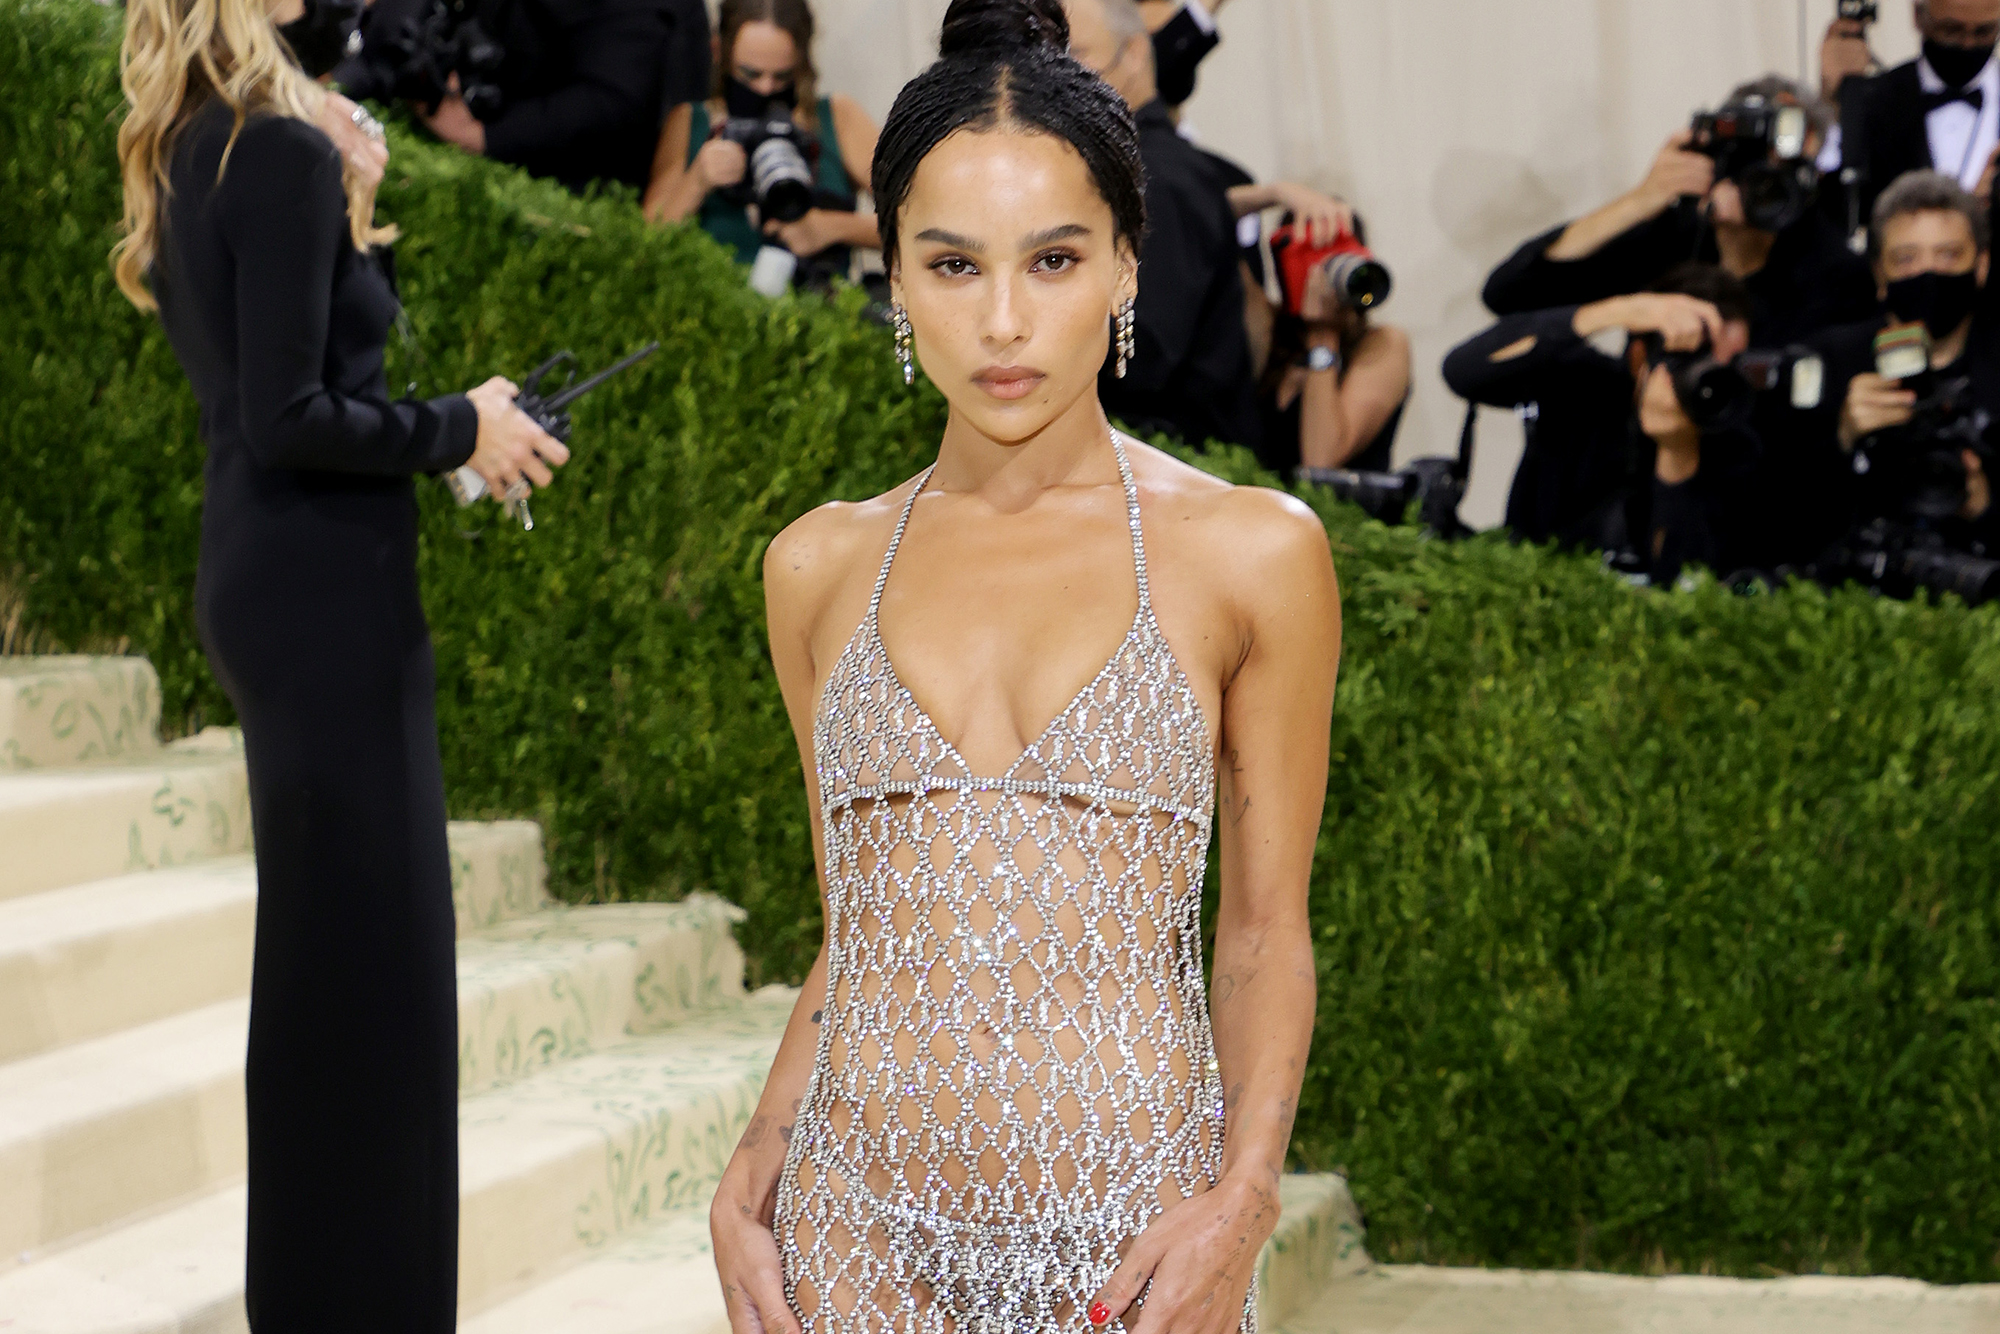 Gala 2021: The Met Ball Is Back With Head-Turning Red Carpet Looks -  Everything Zoomer